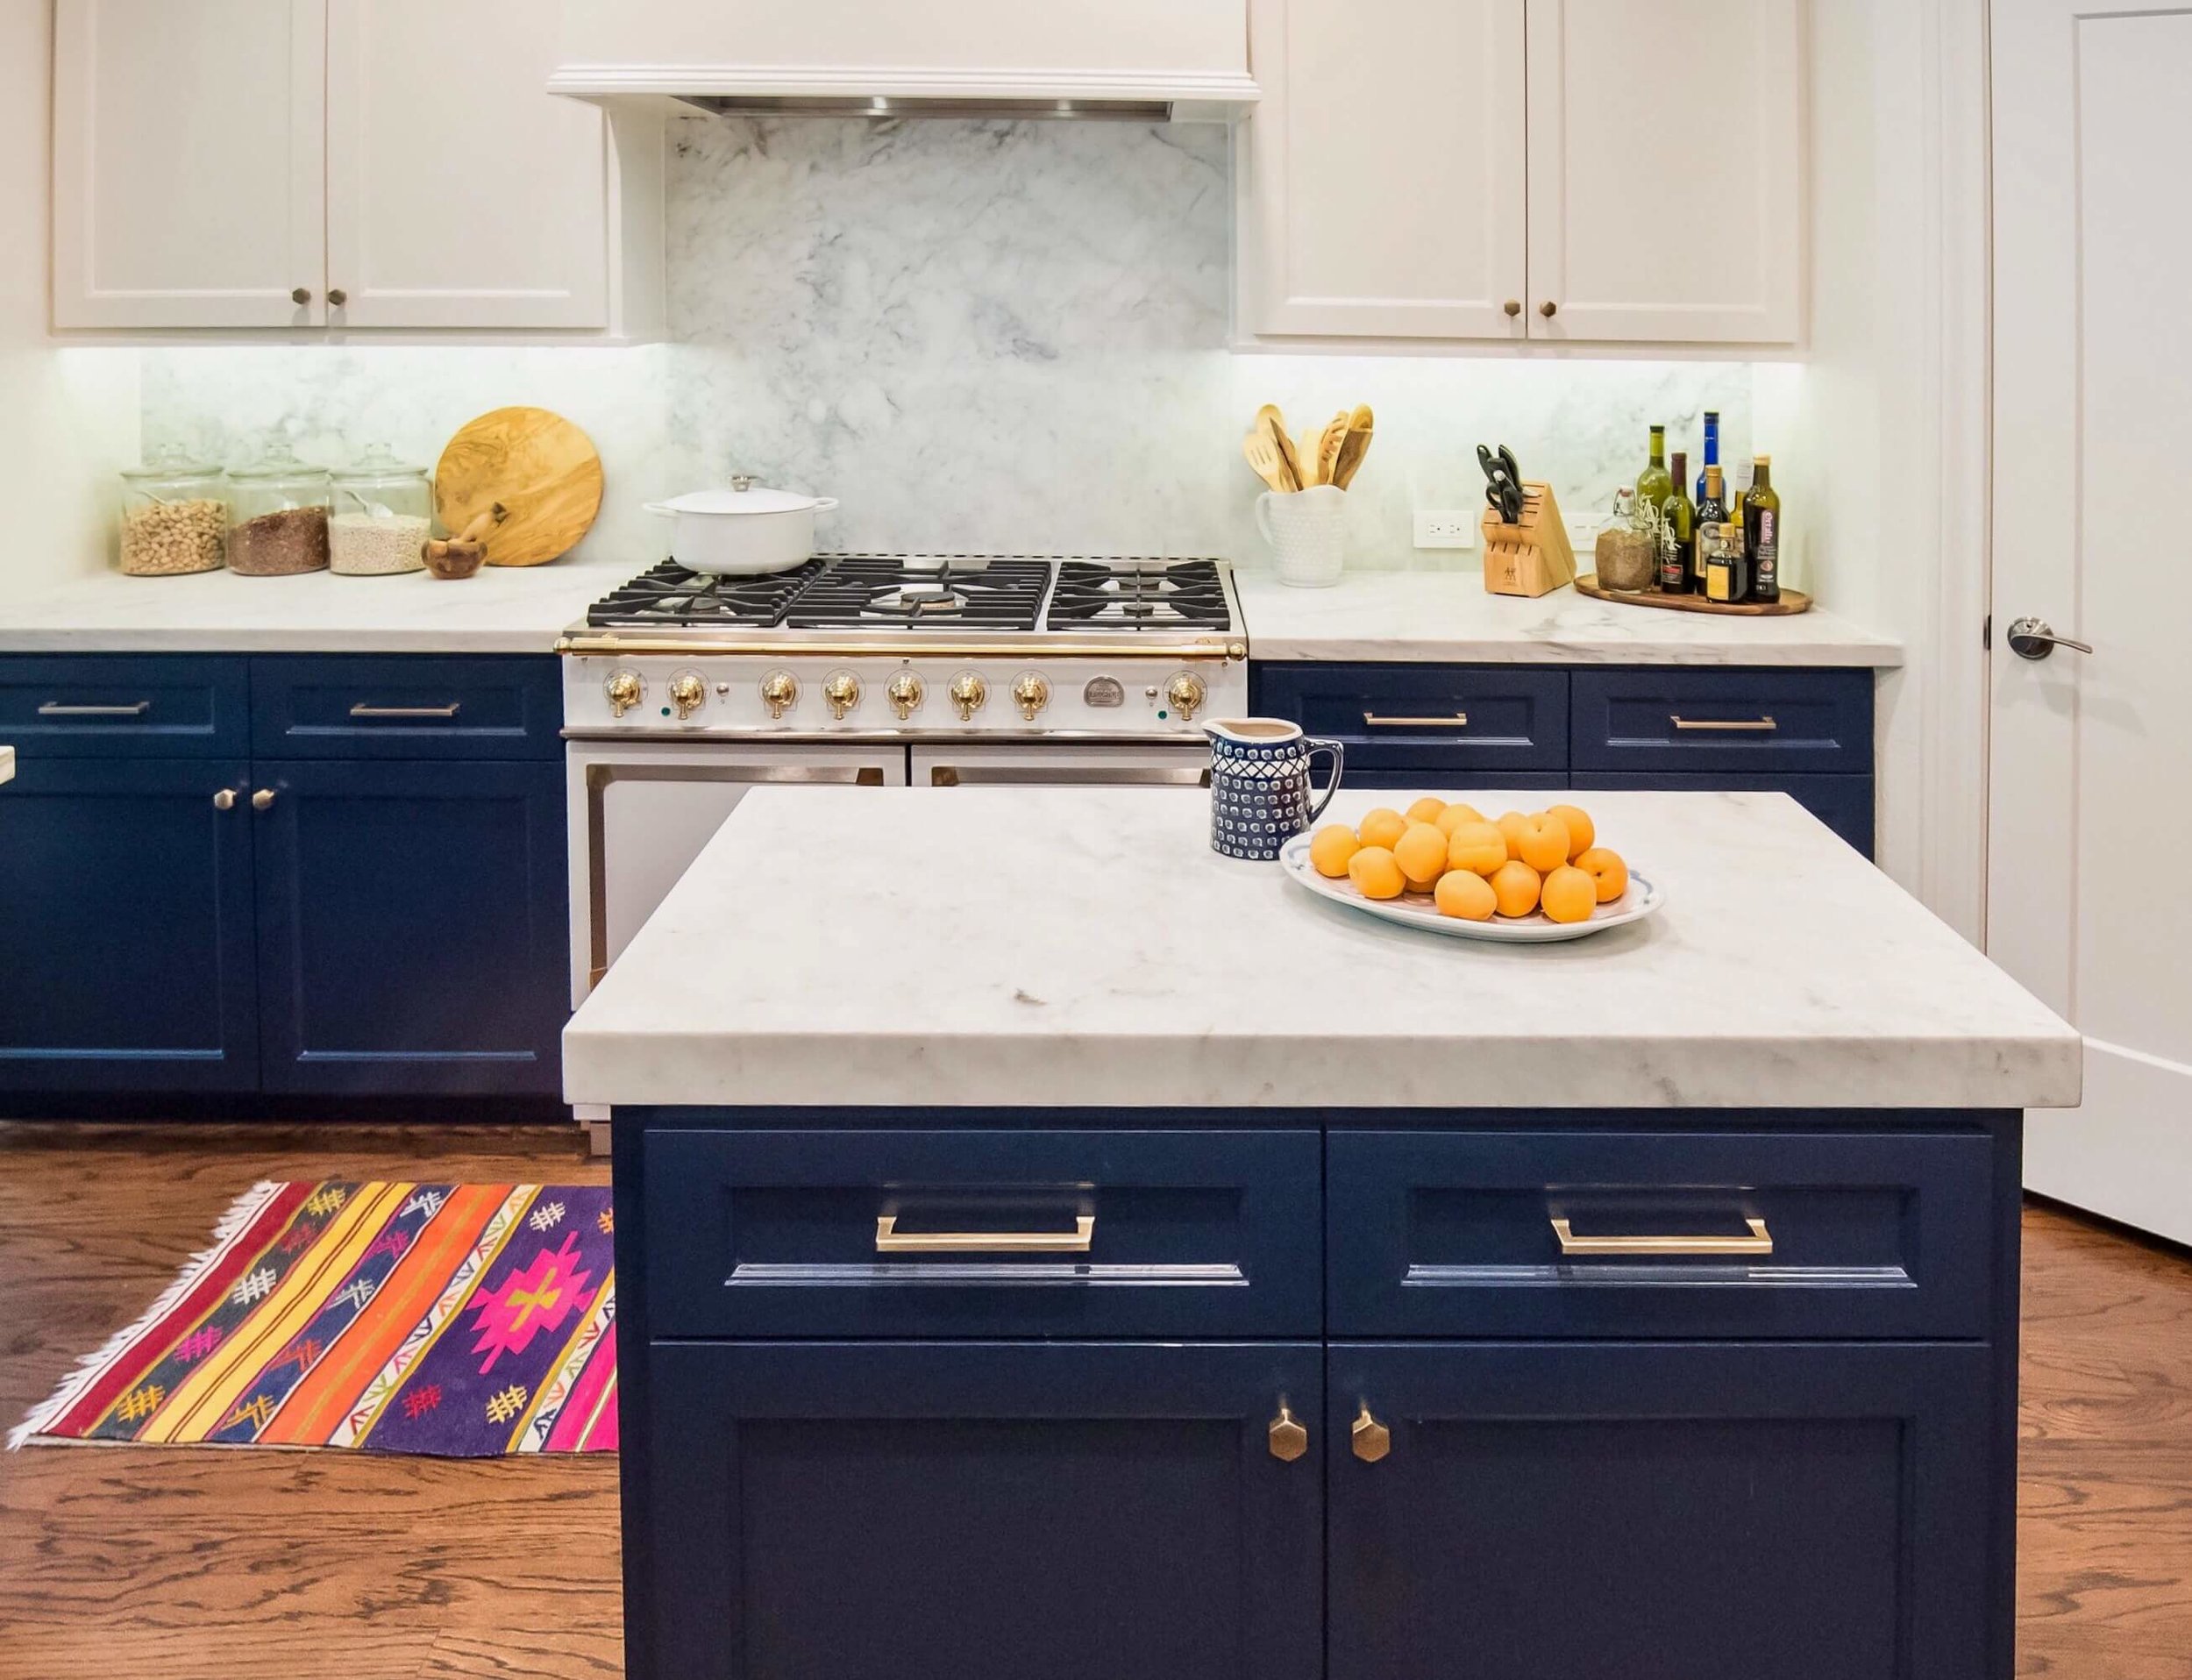 Considering a Natural Stone Backsplash in the Kitchen? Read This First! — DESIGNED